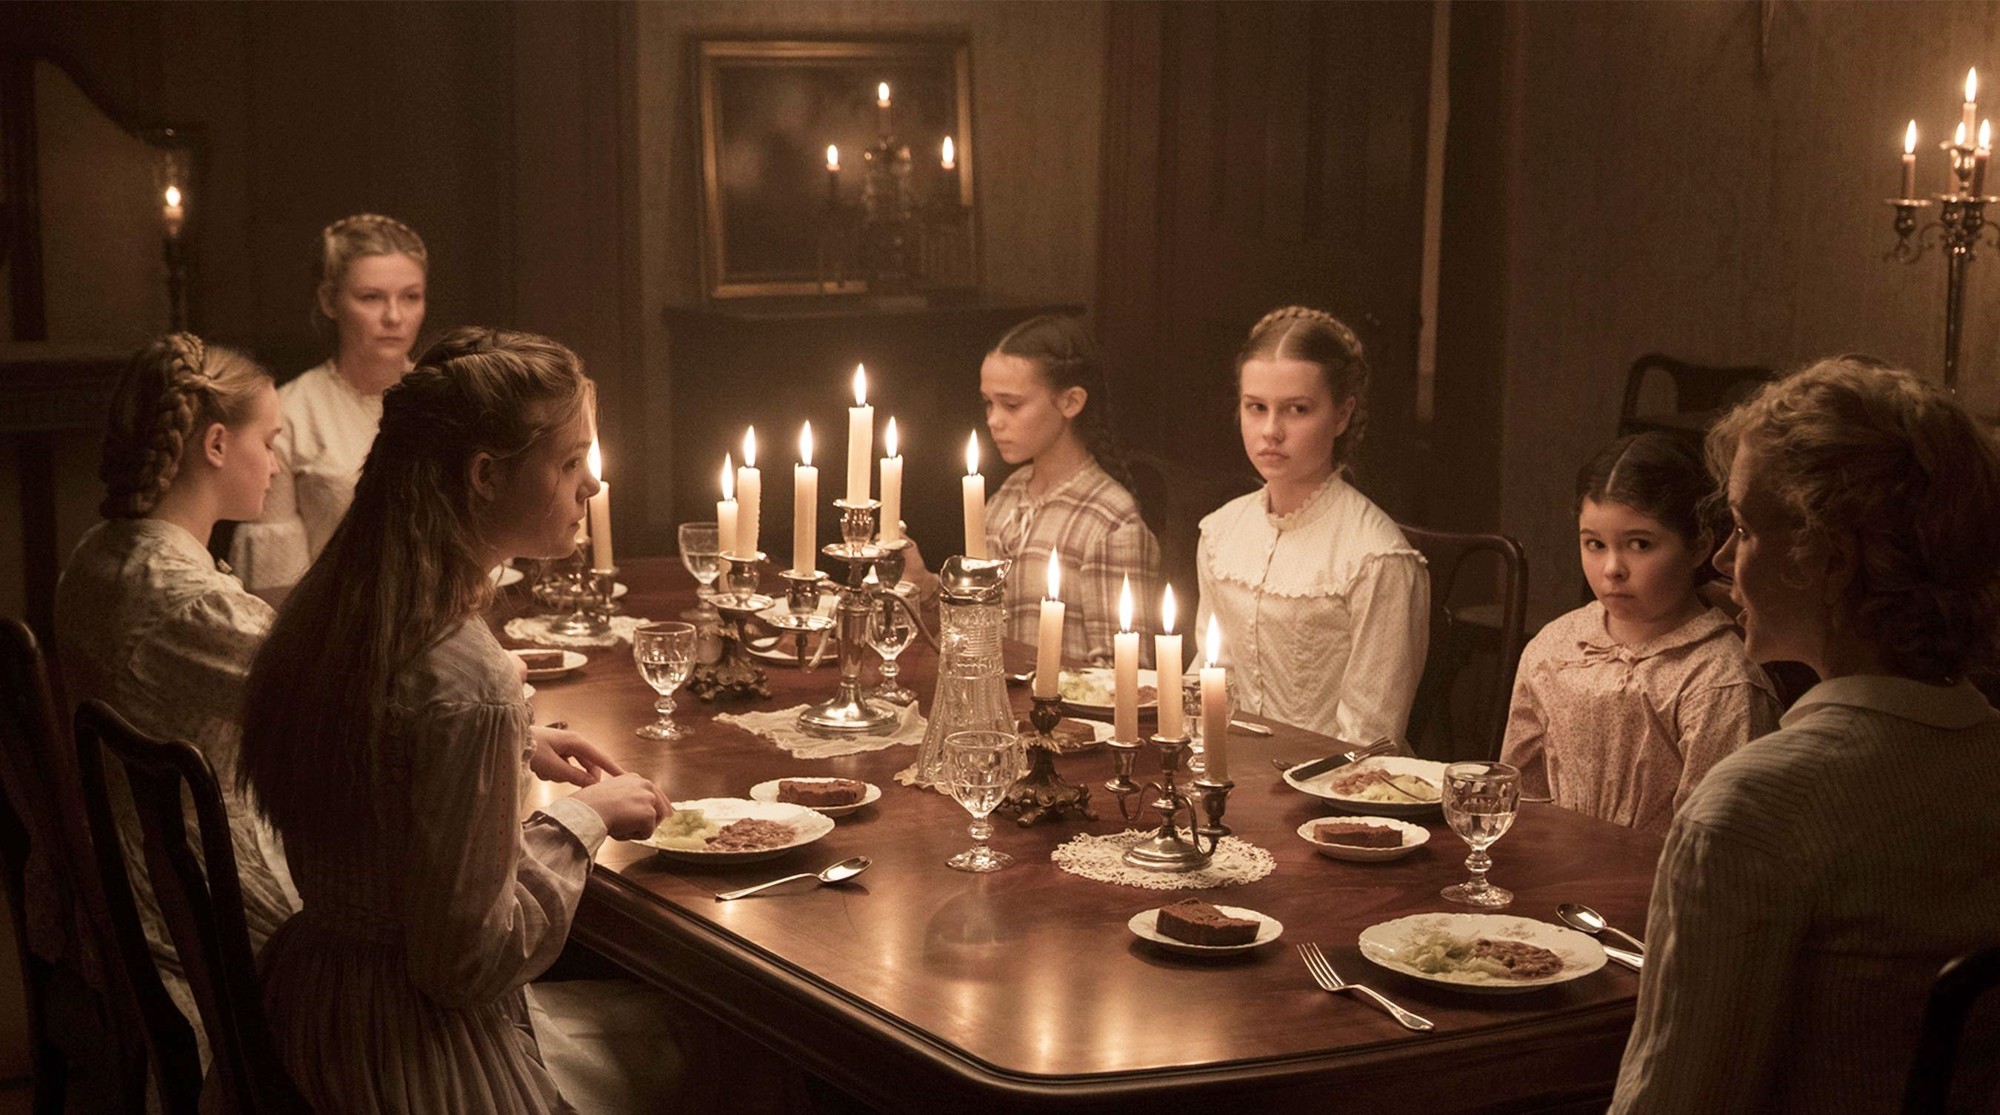 Emma Howard, Kirsten Dunst, Elle Fanning, Oona Laurence, Angourie Rice, Addison Riecke and Nicole Kidman in Focus Features' The Beguiled (2017)